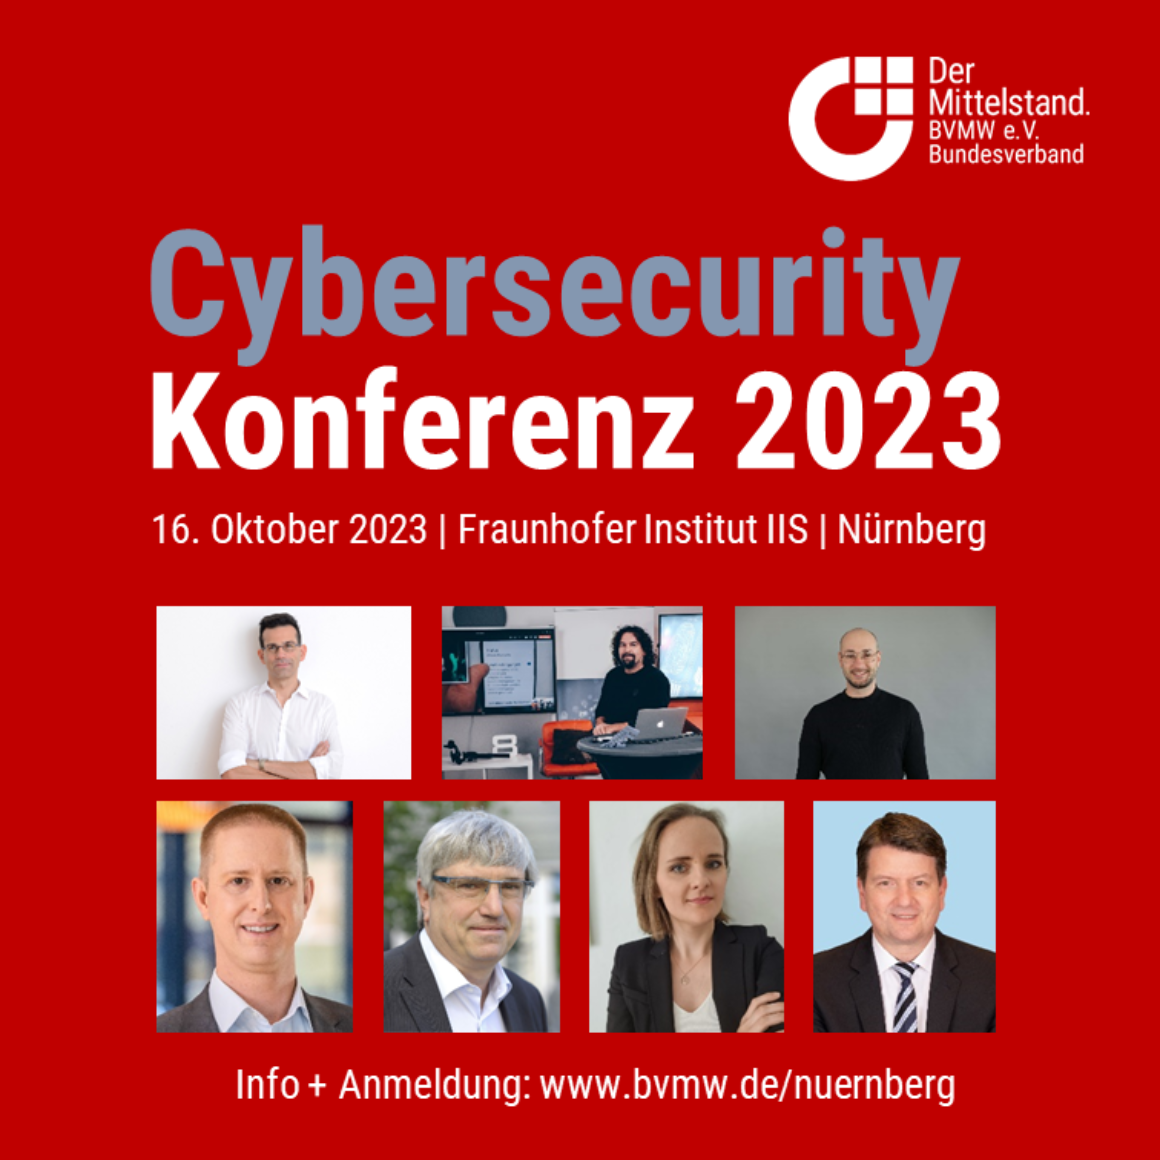 Cybersecurity 2023